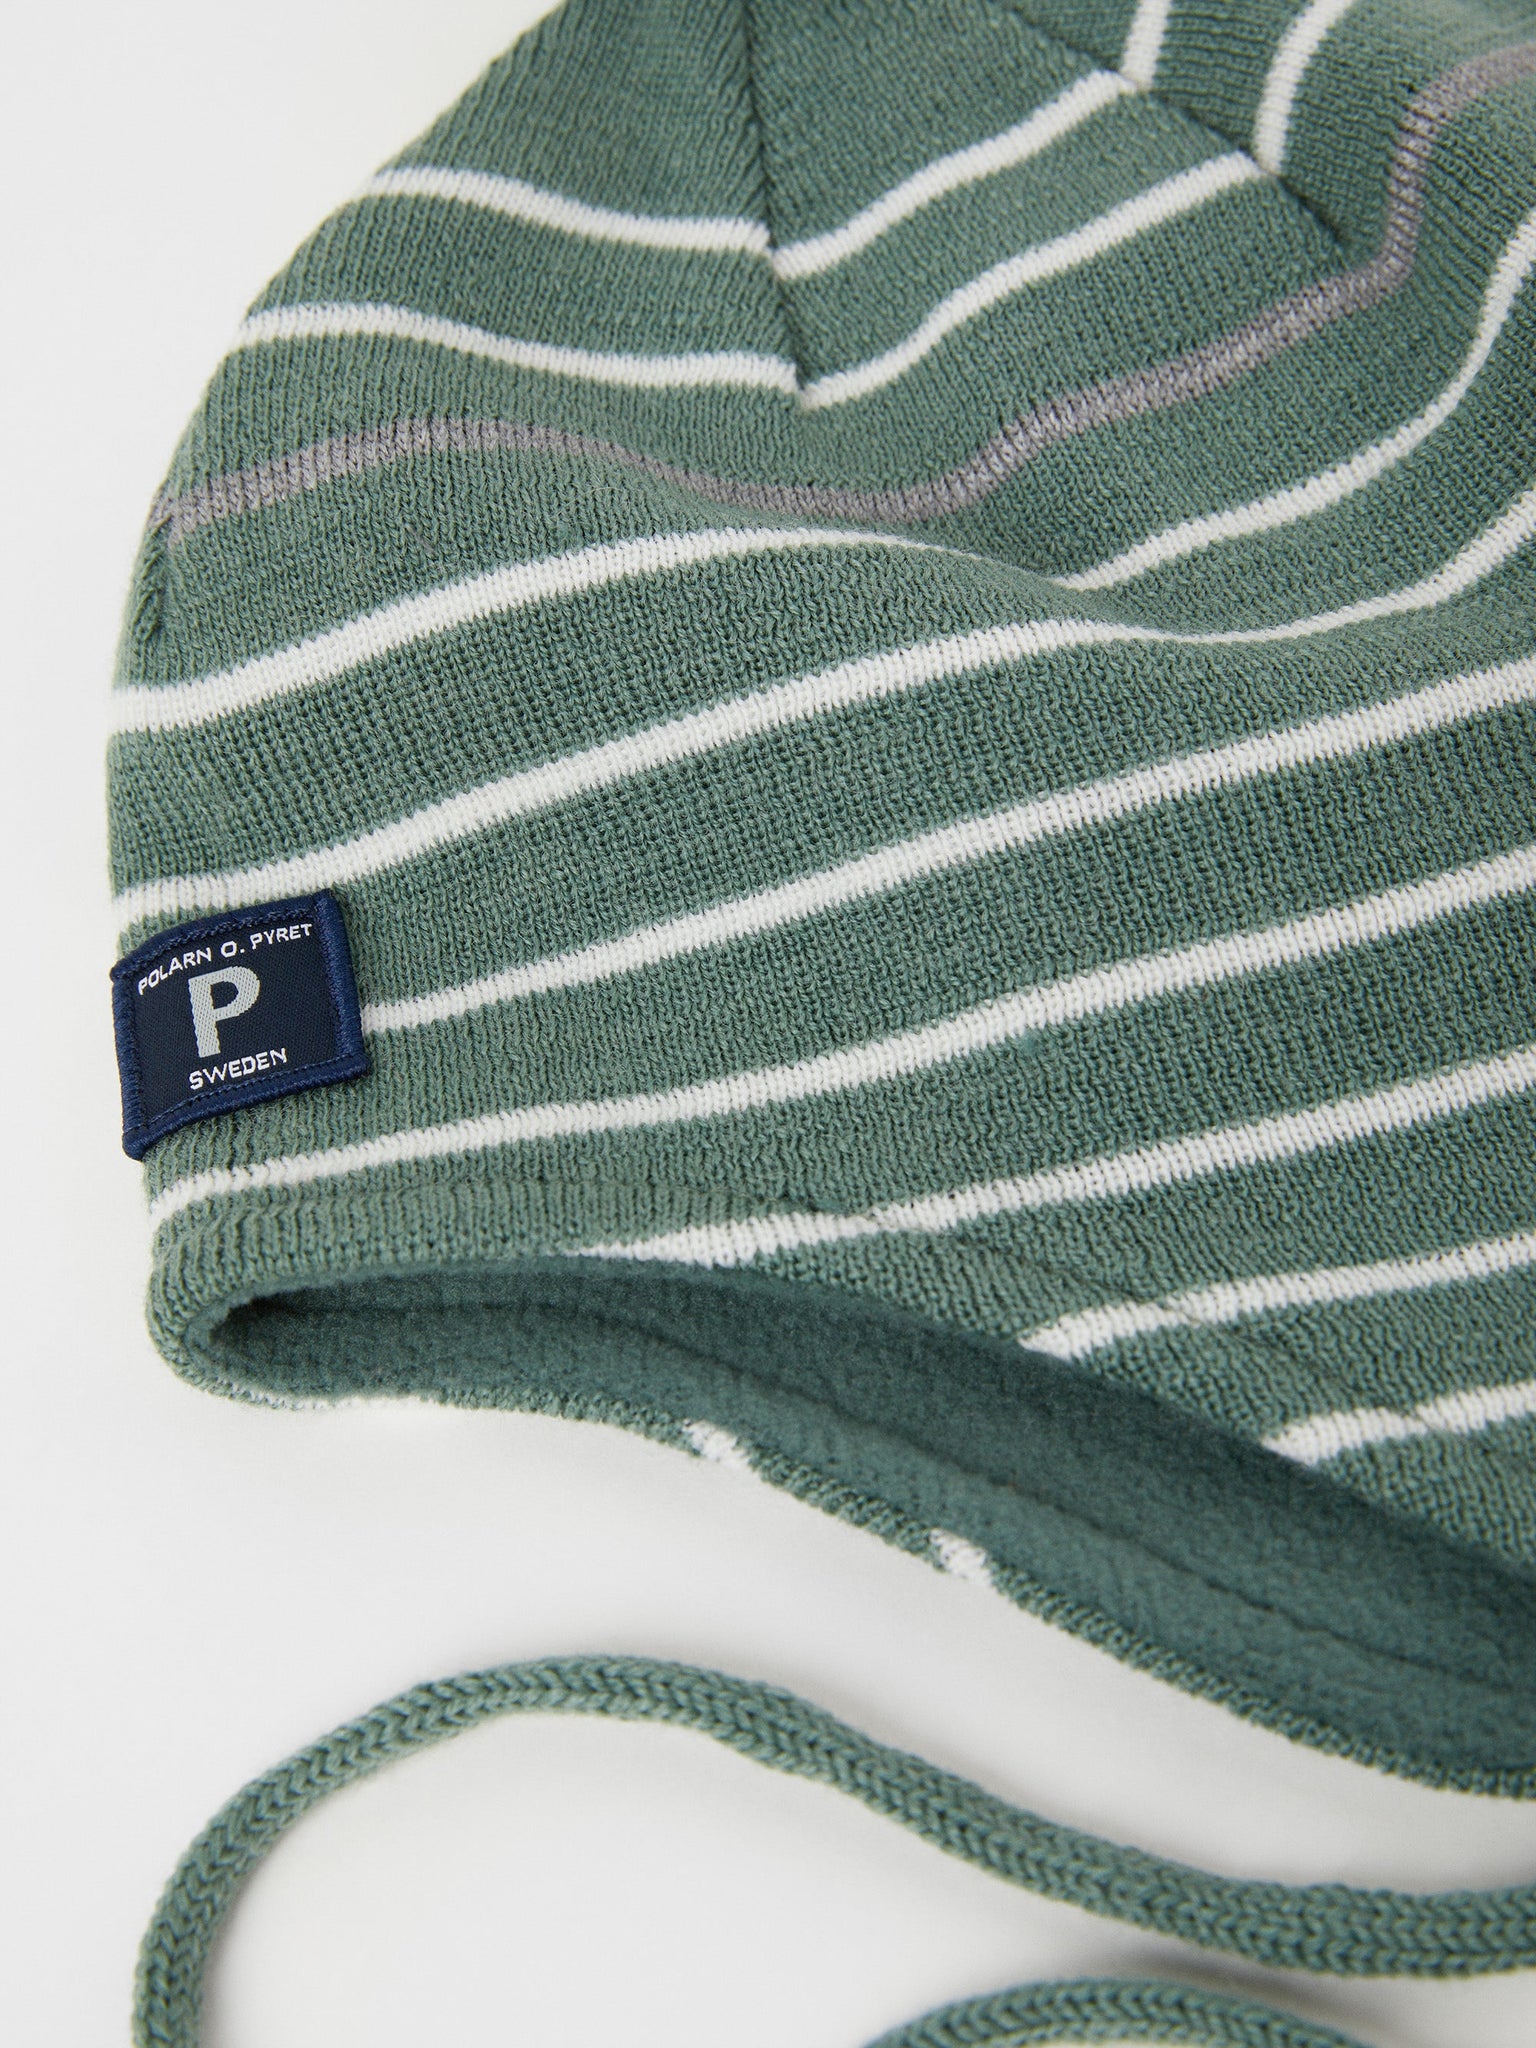 Merino Wool Green Kids Bobble Hat from the Polarn O. Pyret outerwear collection. The best ethical kids outerwear.